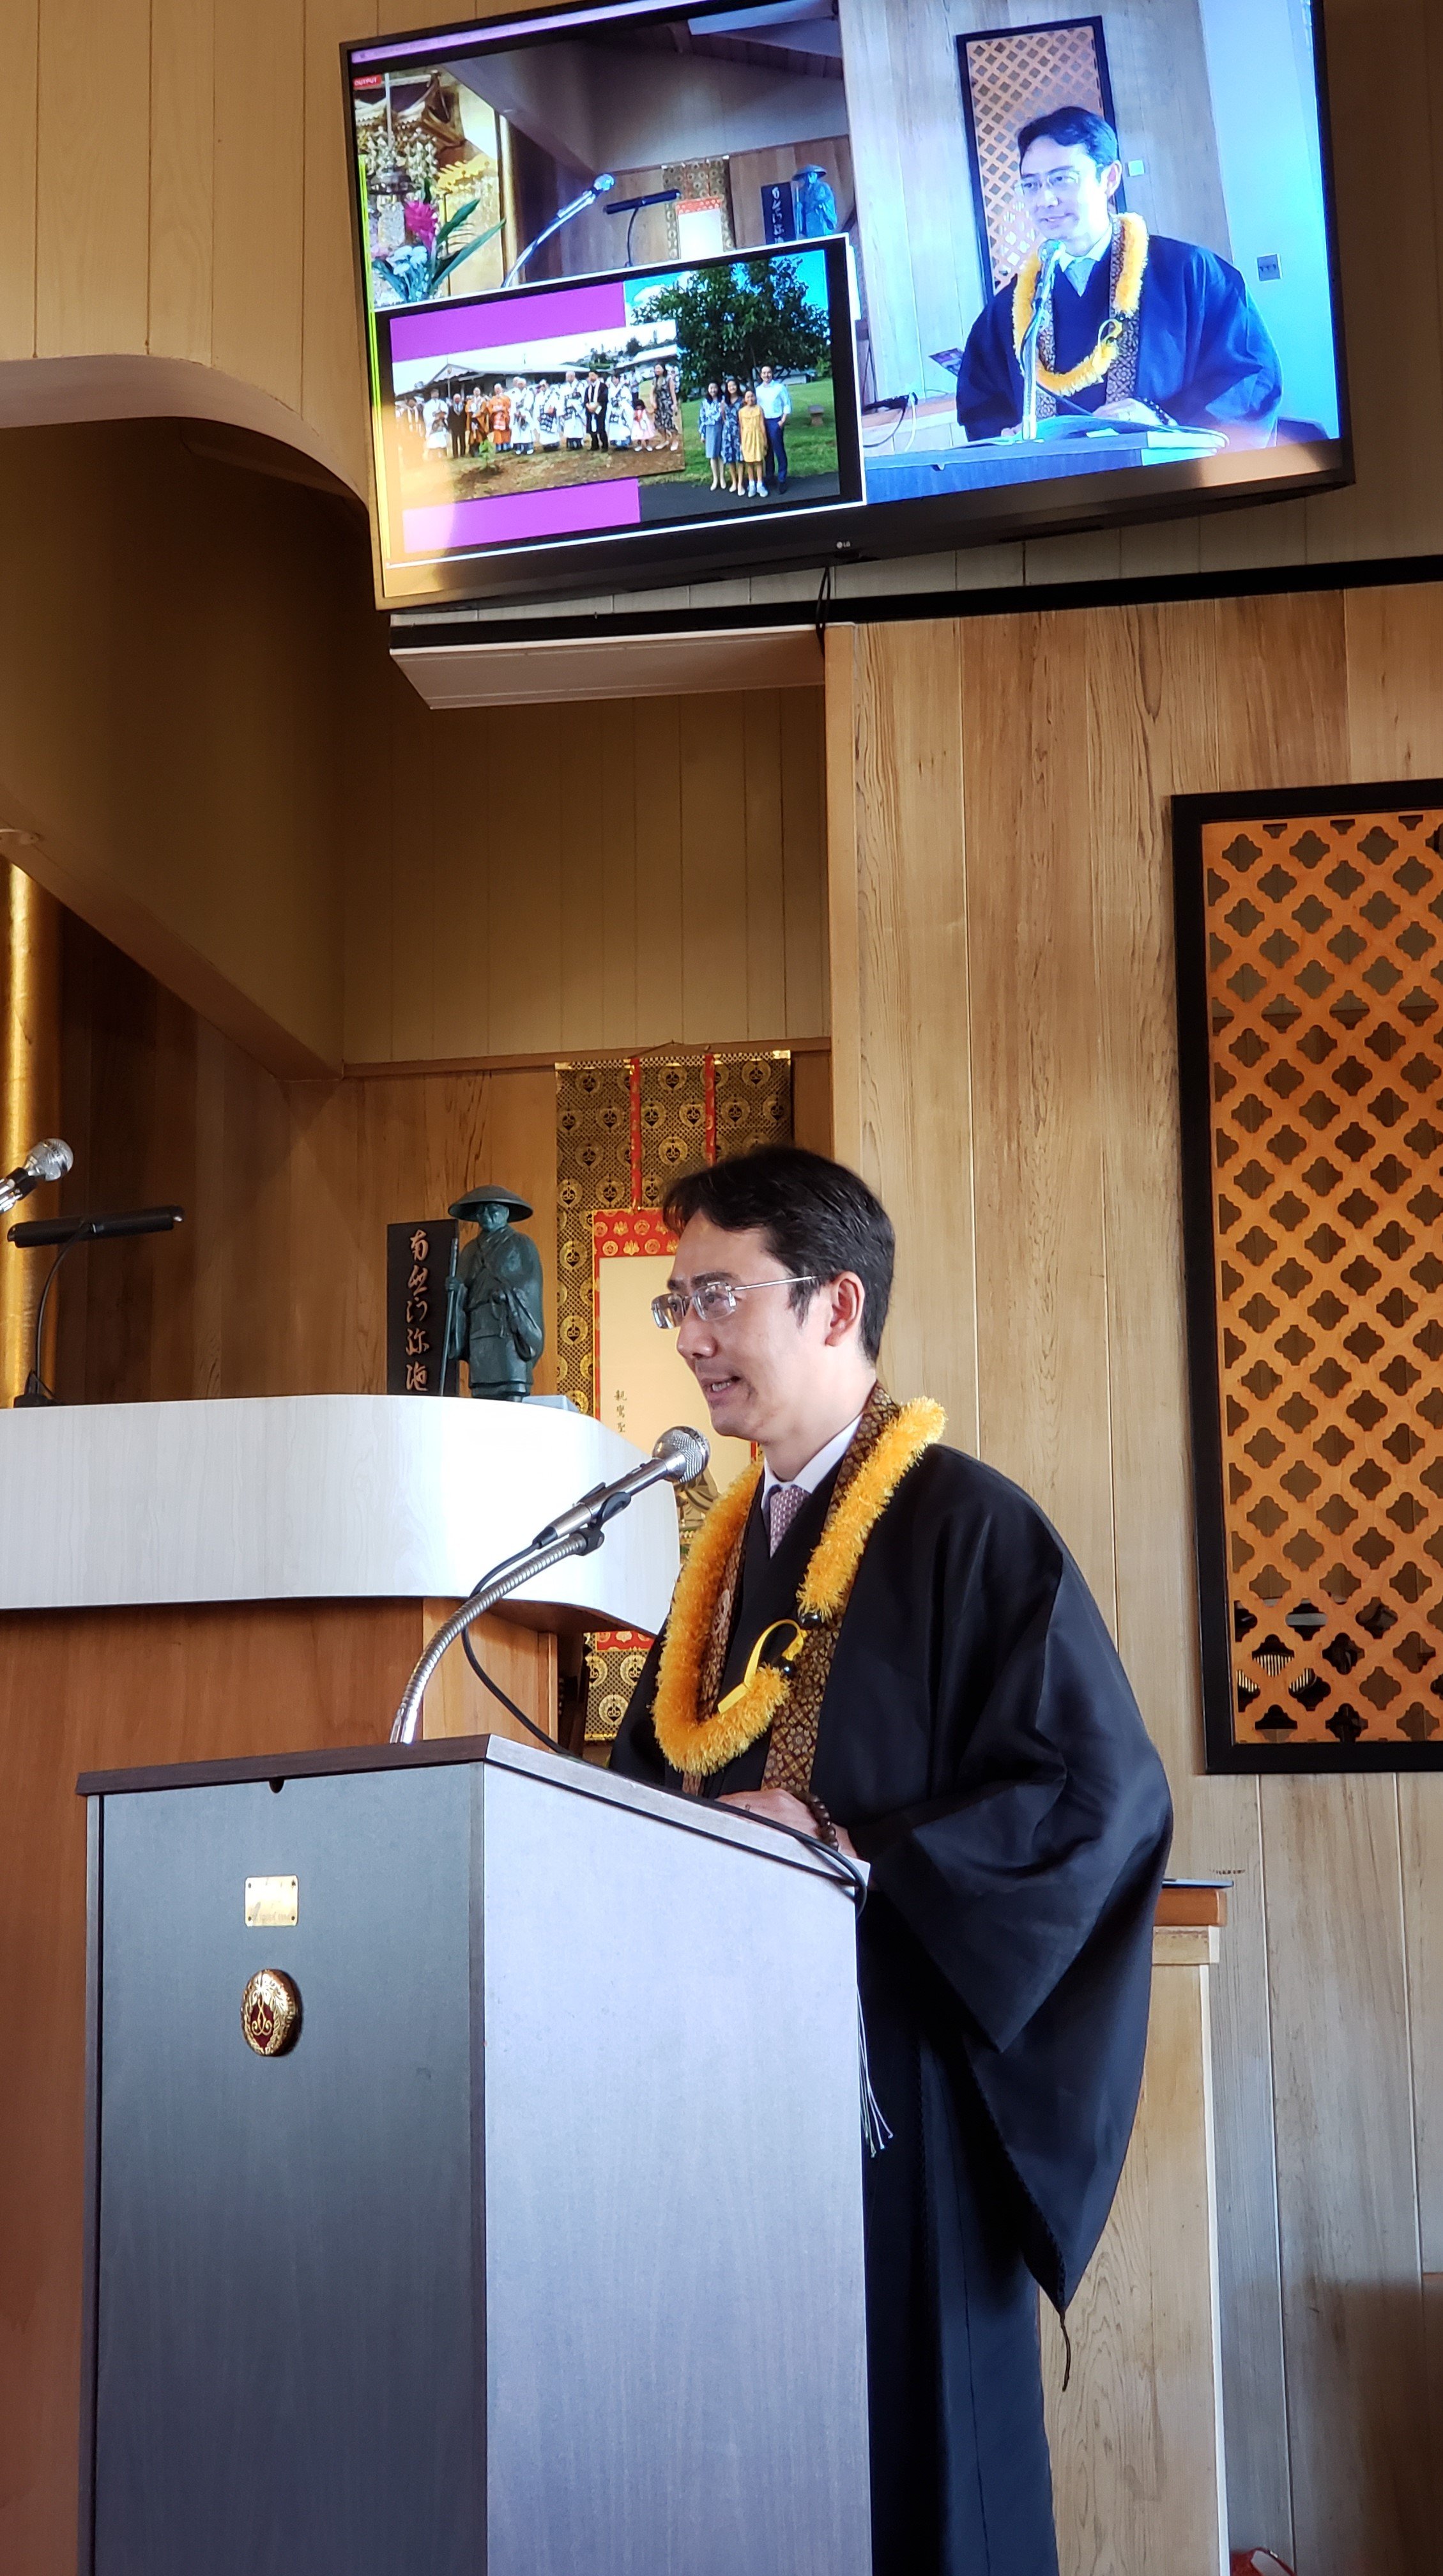   Rev. Umitani spoke about the Bodhi Tree which he planted in 2007 for the 100th Anniversary  